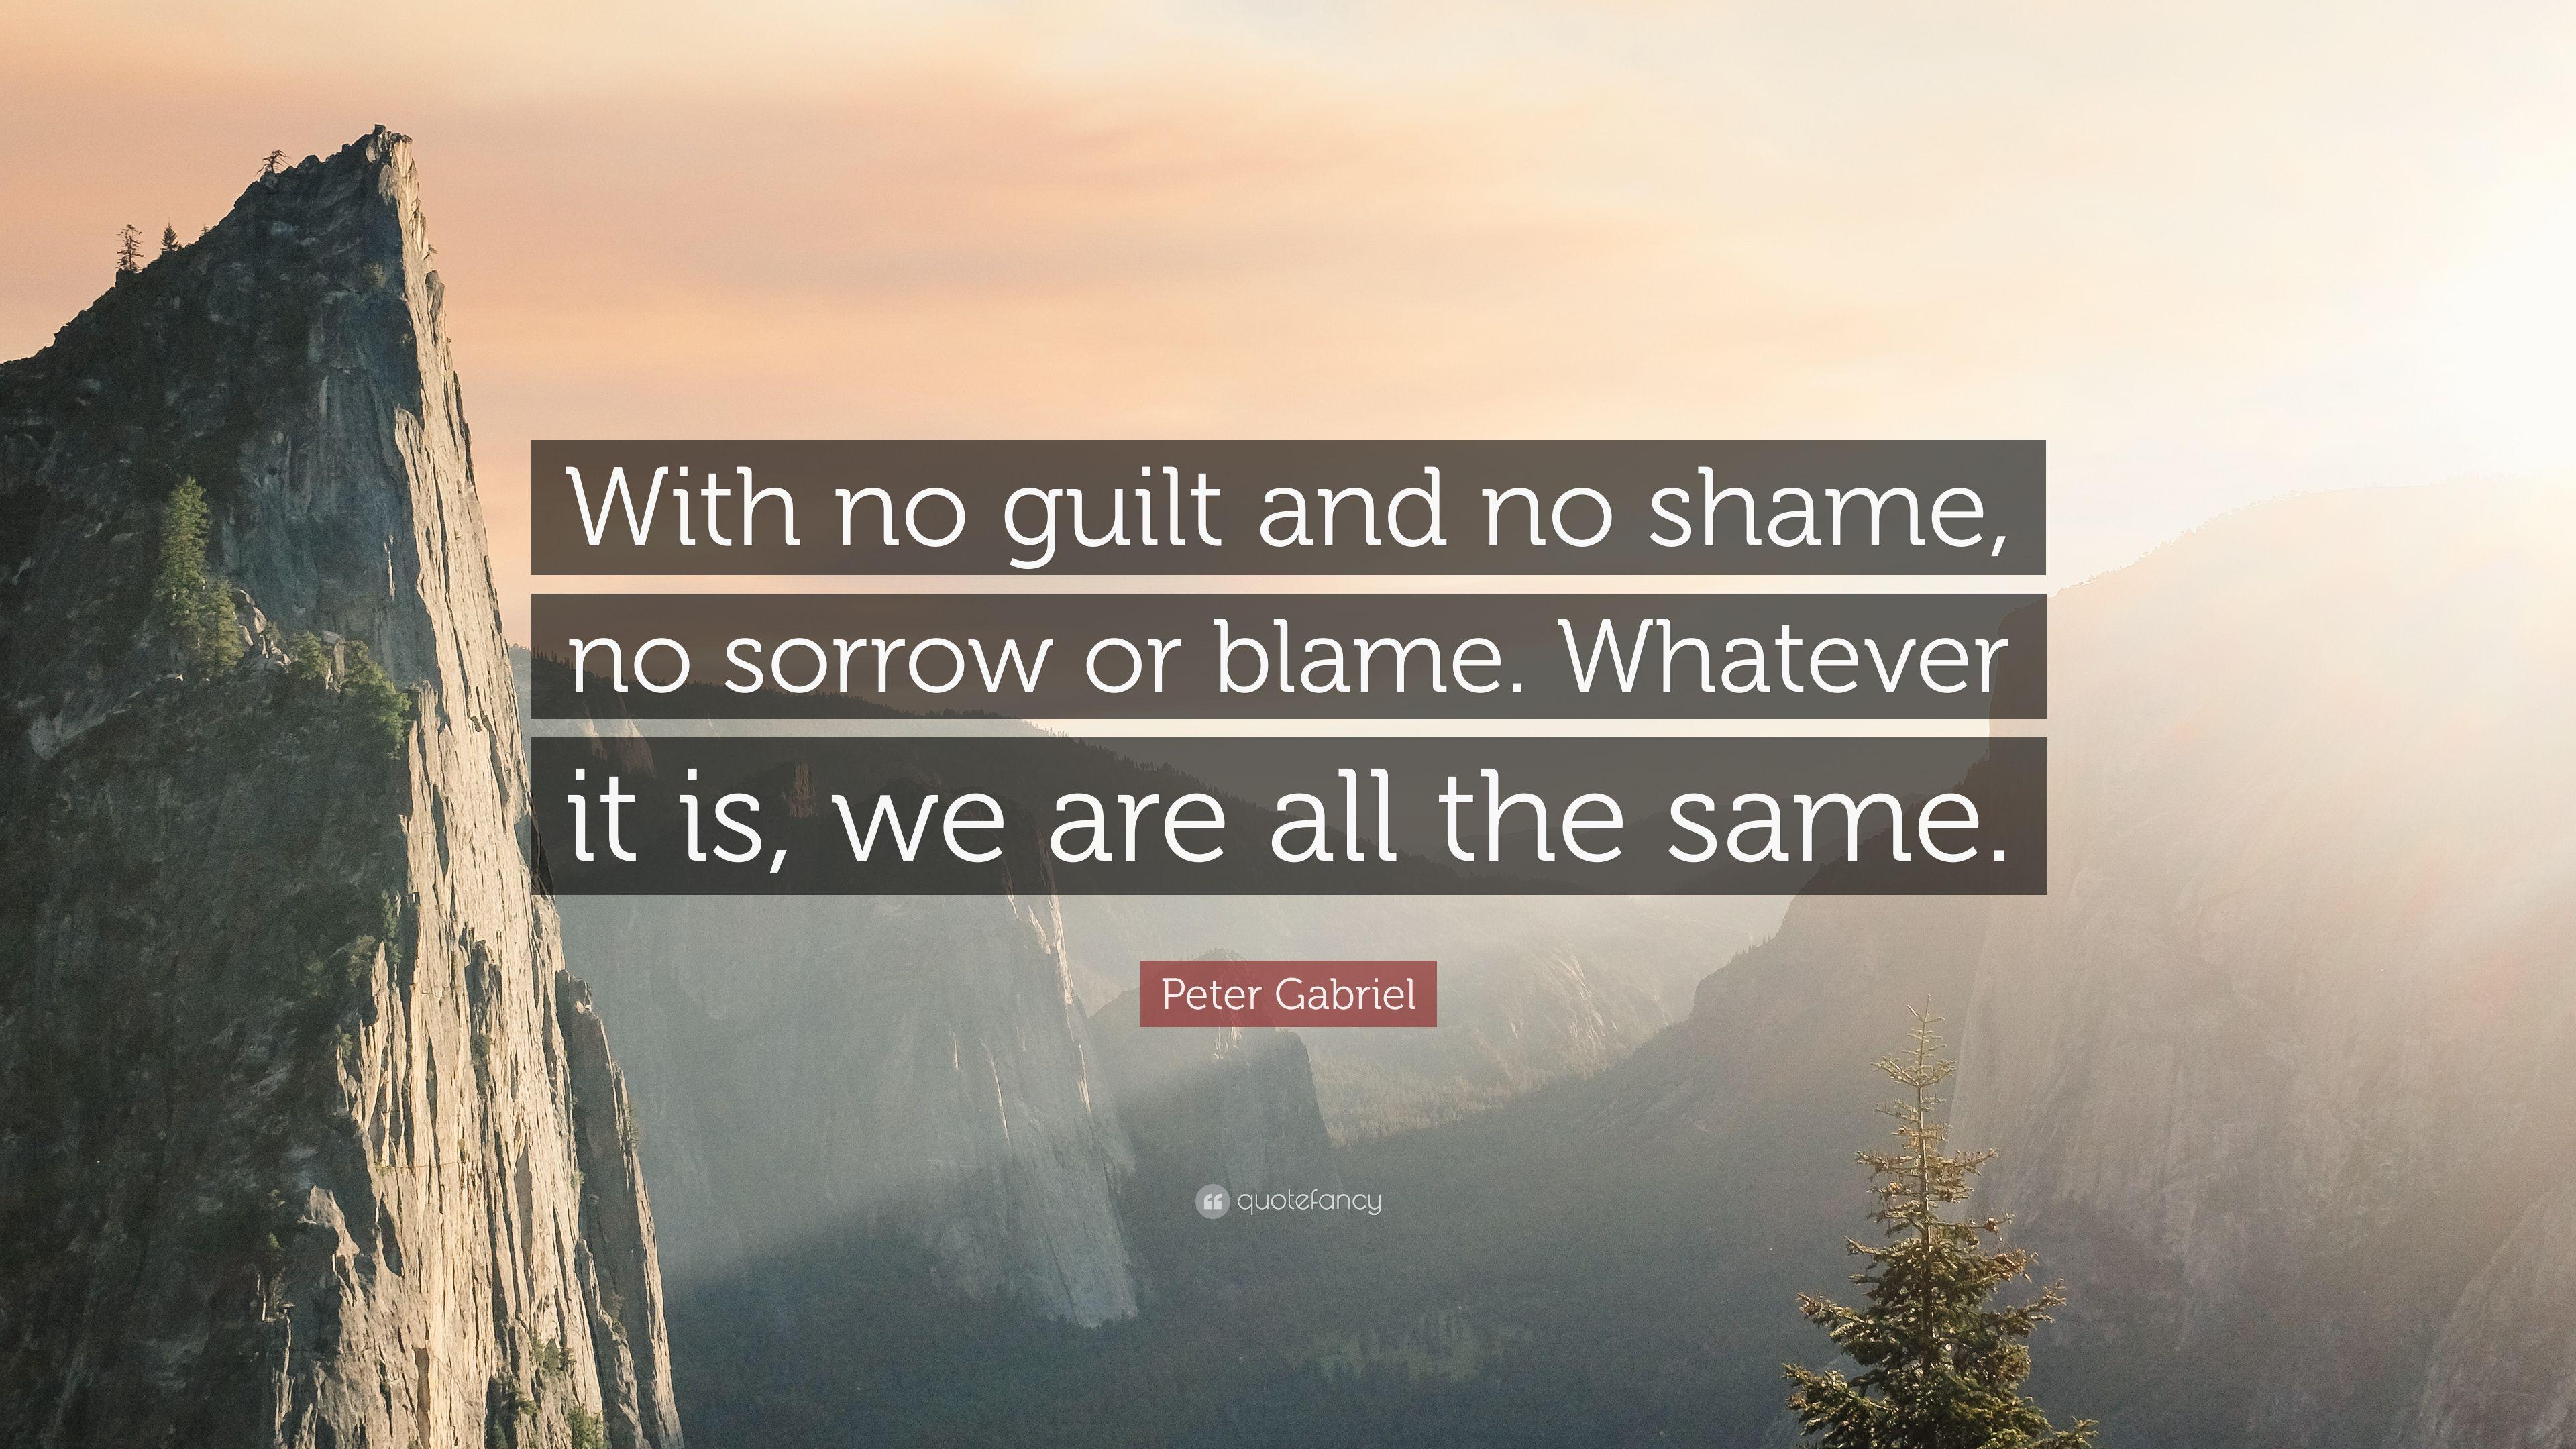 Peter Gabriel Quote: “With no guilt and no shame, no sorrow or blame